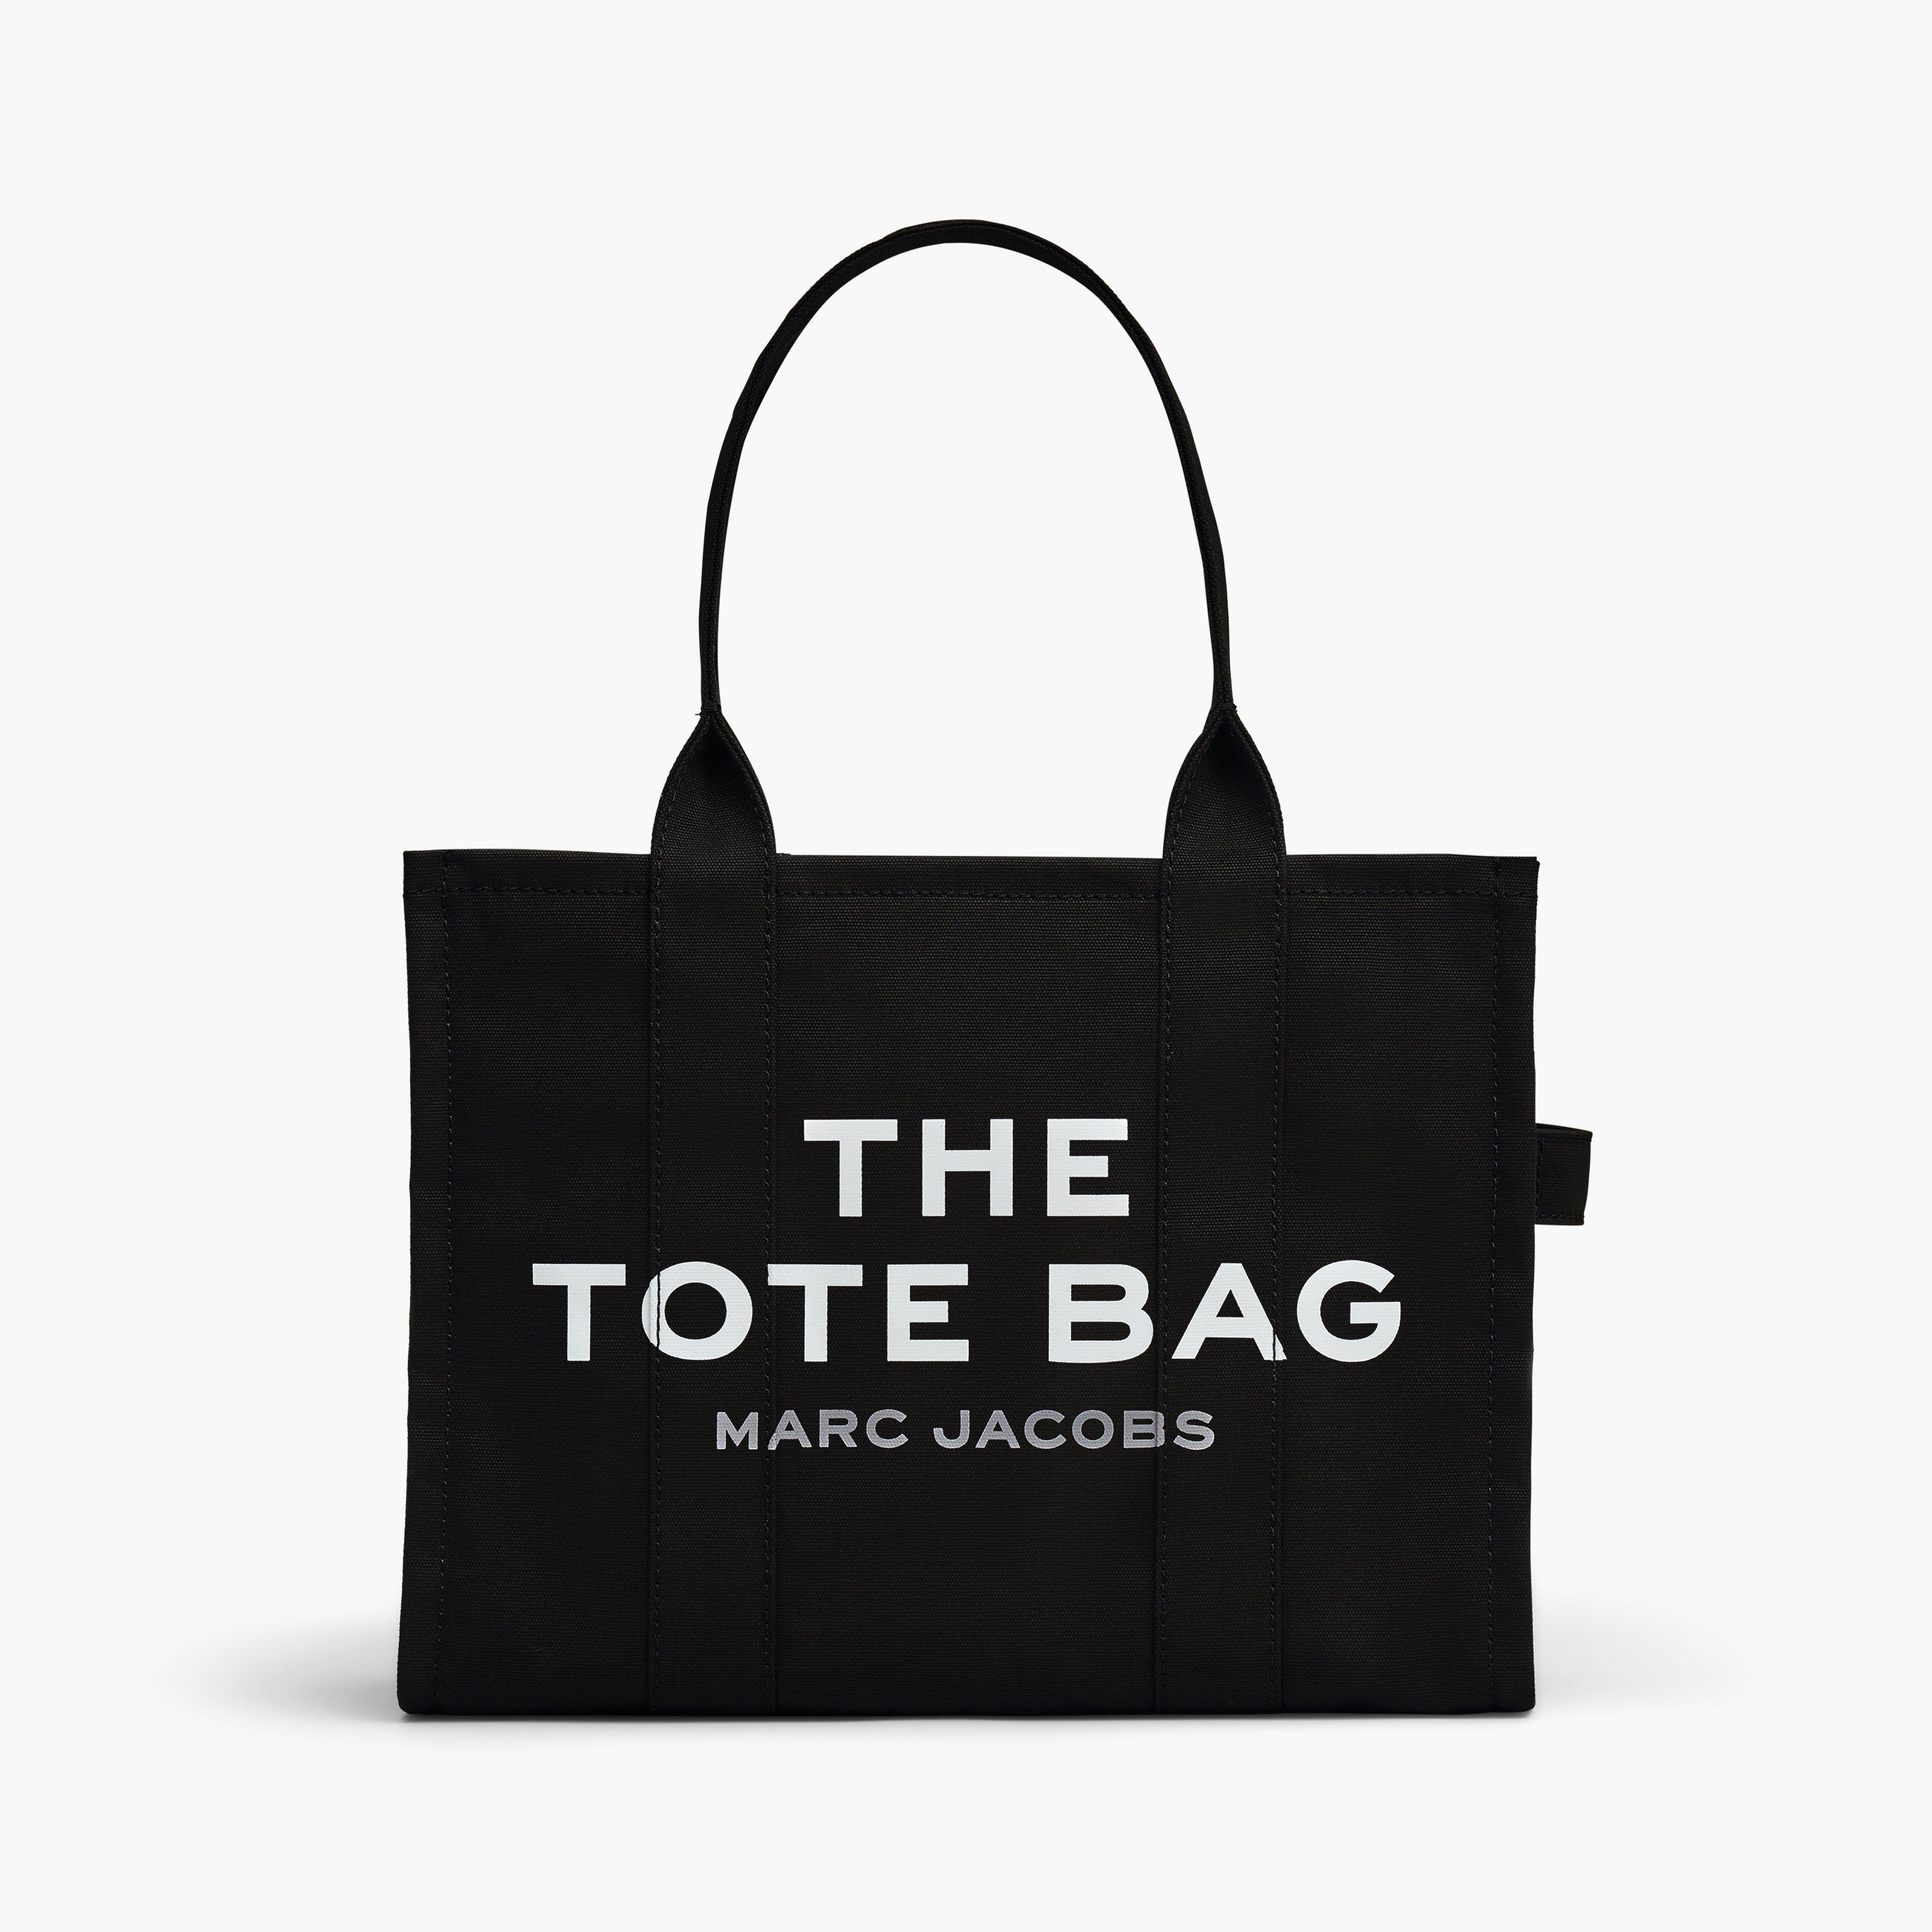 MARC JACOBSトートバッグ